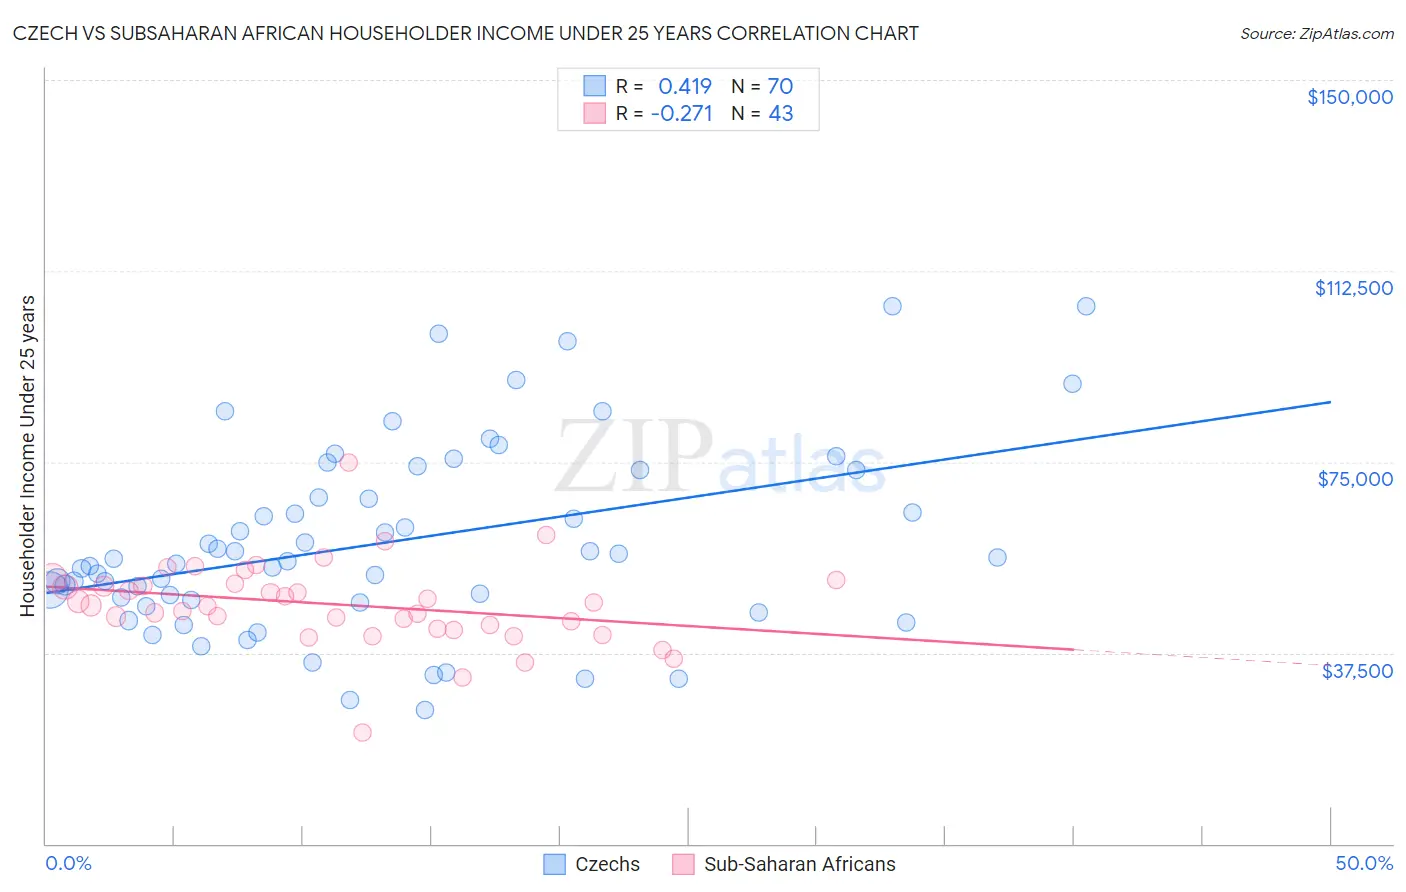 Czech vs Subsaharan African Householder Income Under 25 years